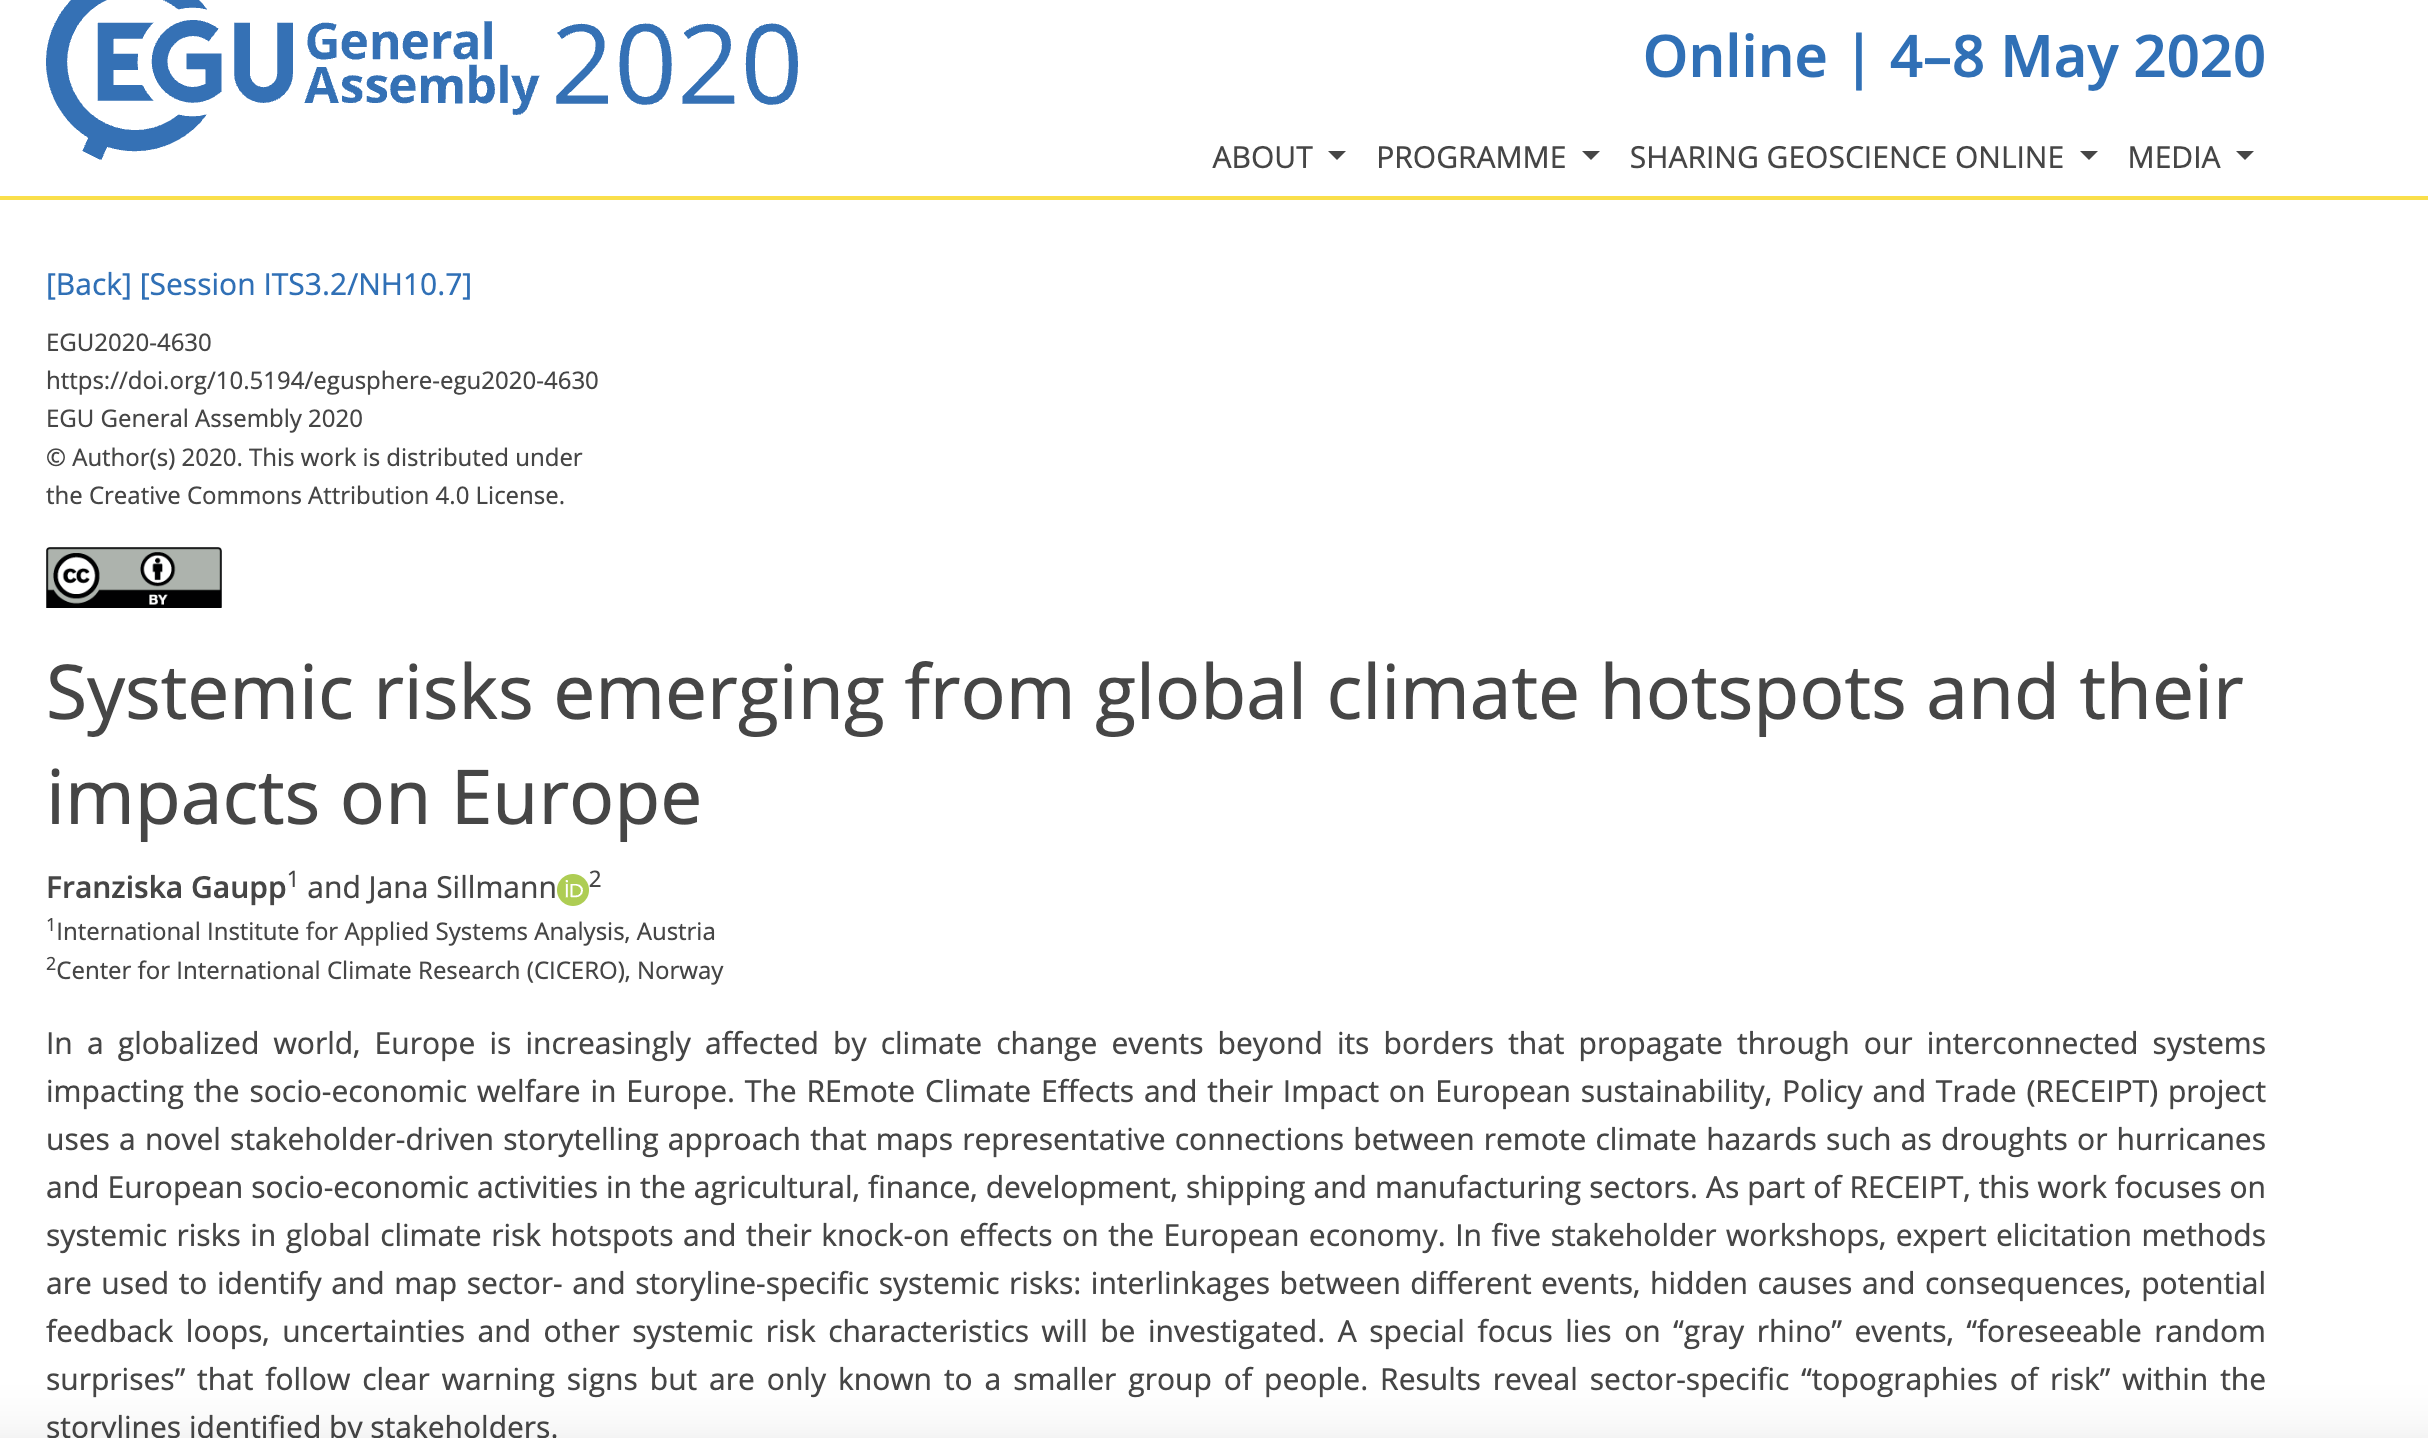 WP8 Synthesis: synergy of risks and policy implications- Systemic risks emerging from global climate hotspots and their impacts on Europe